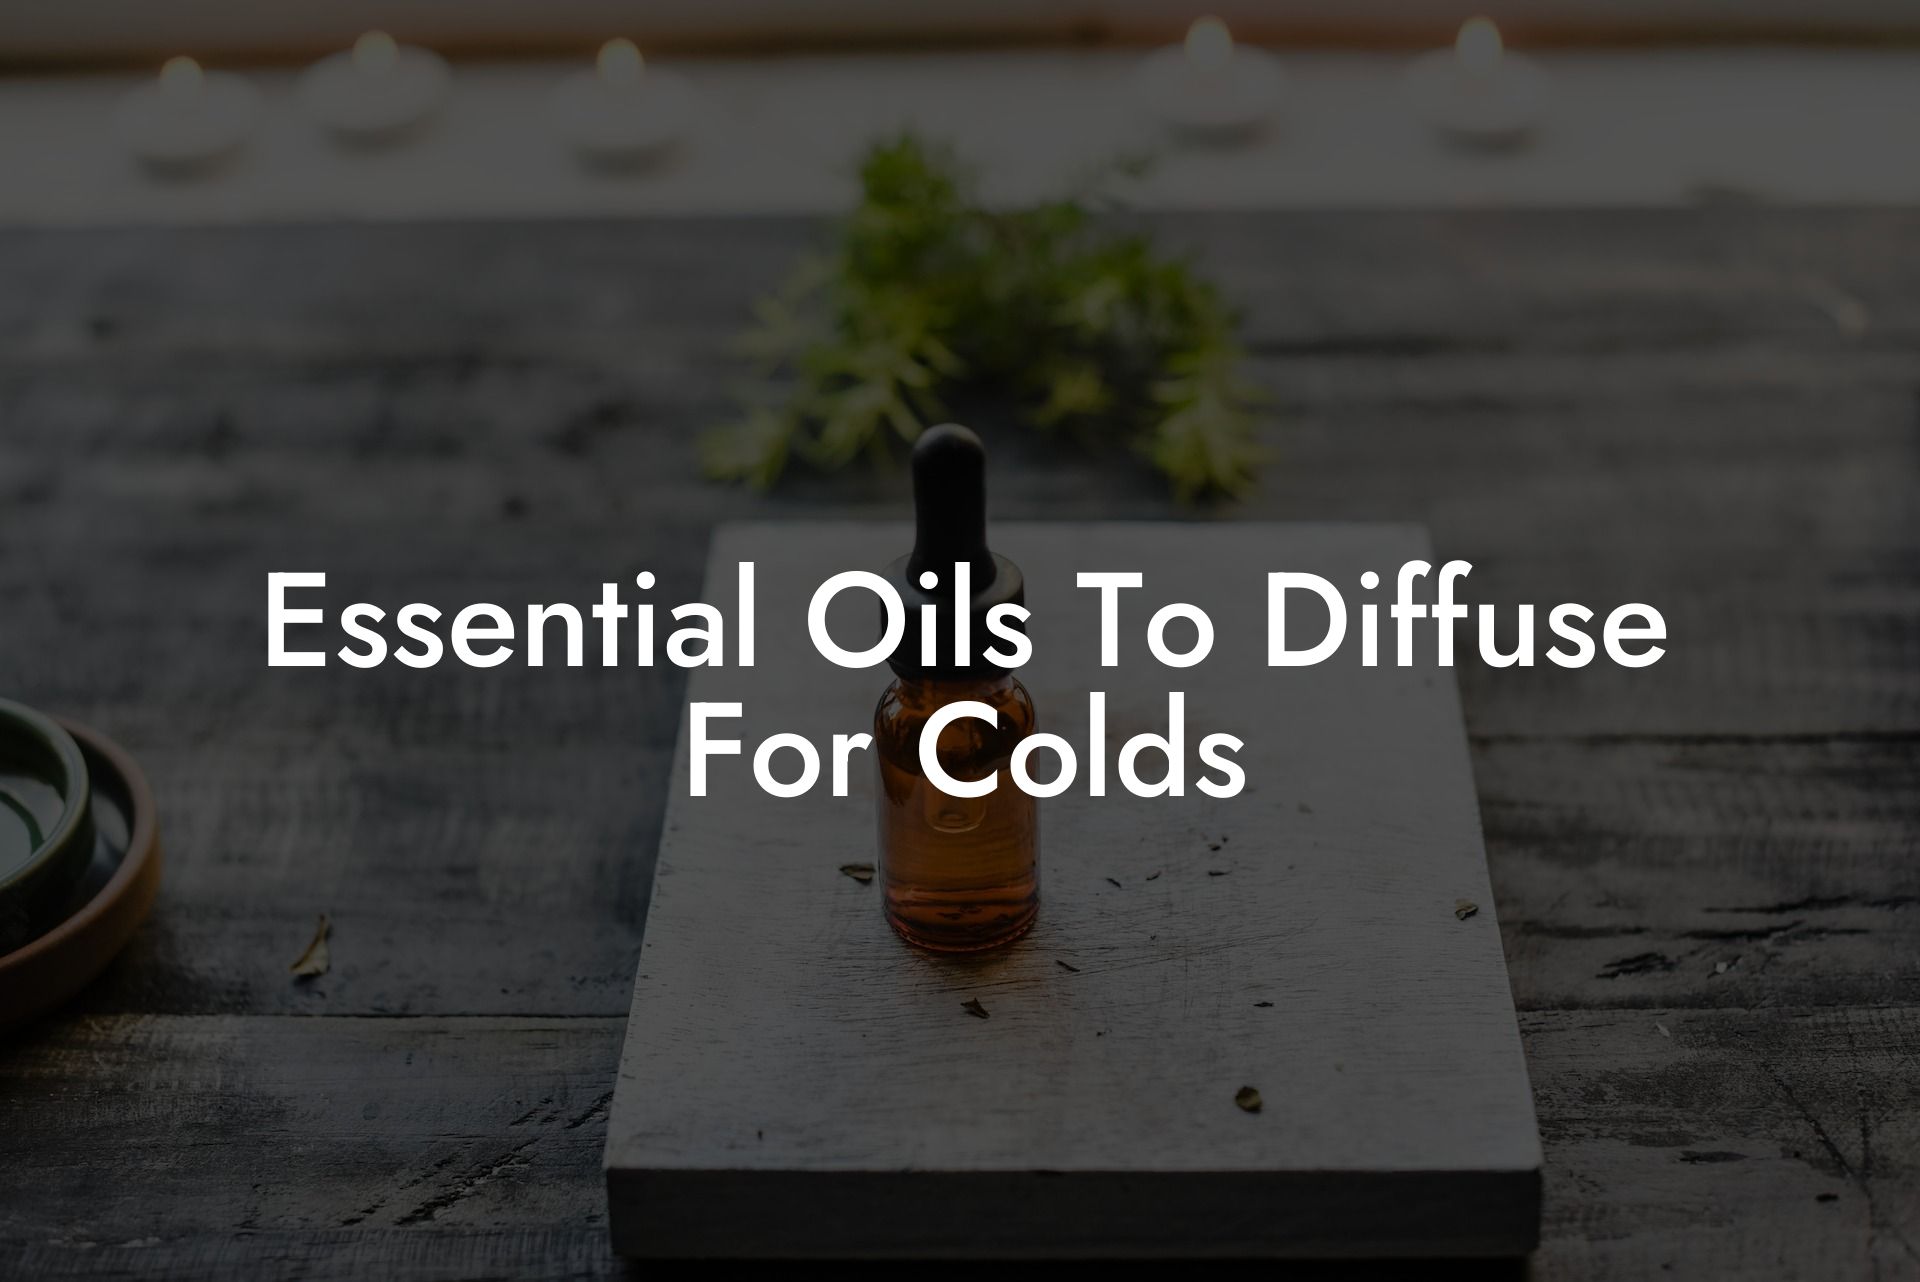 Essential Oils To Diffuse For Colds